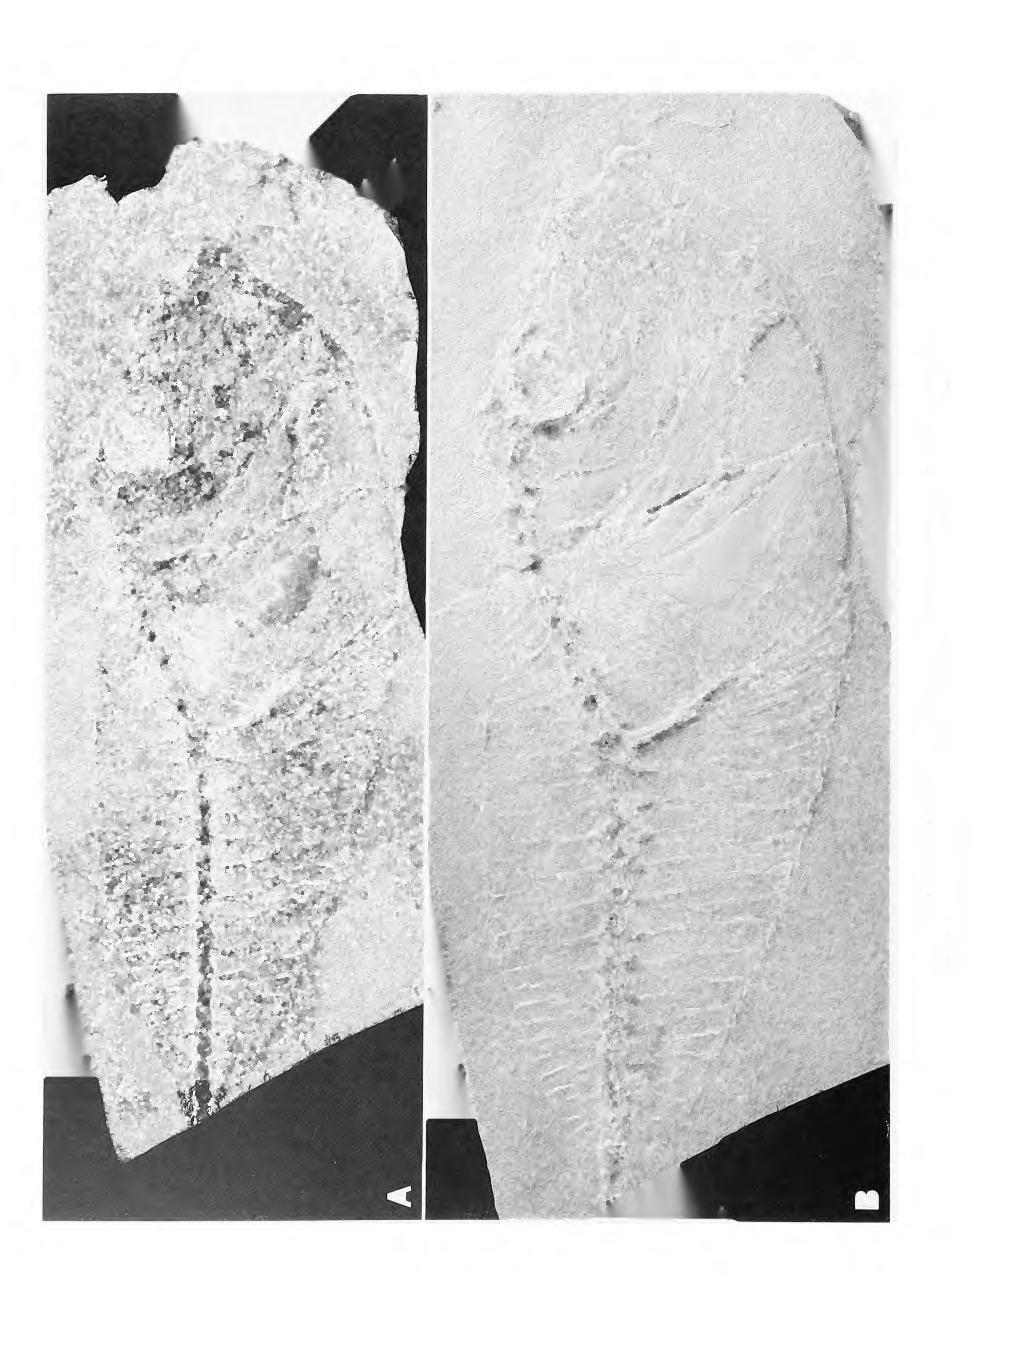 22 SMITHSONIAN CONTRIBUTIONS TO PALEOBIOLOGY "3 (N